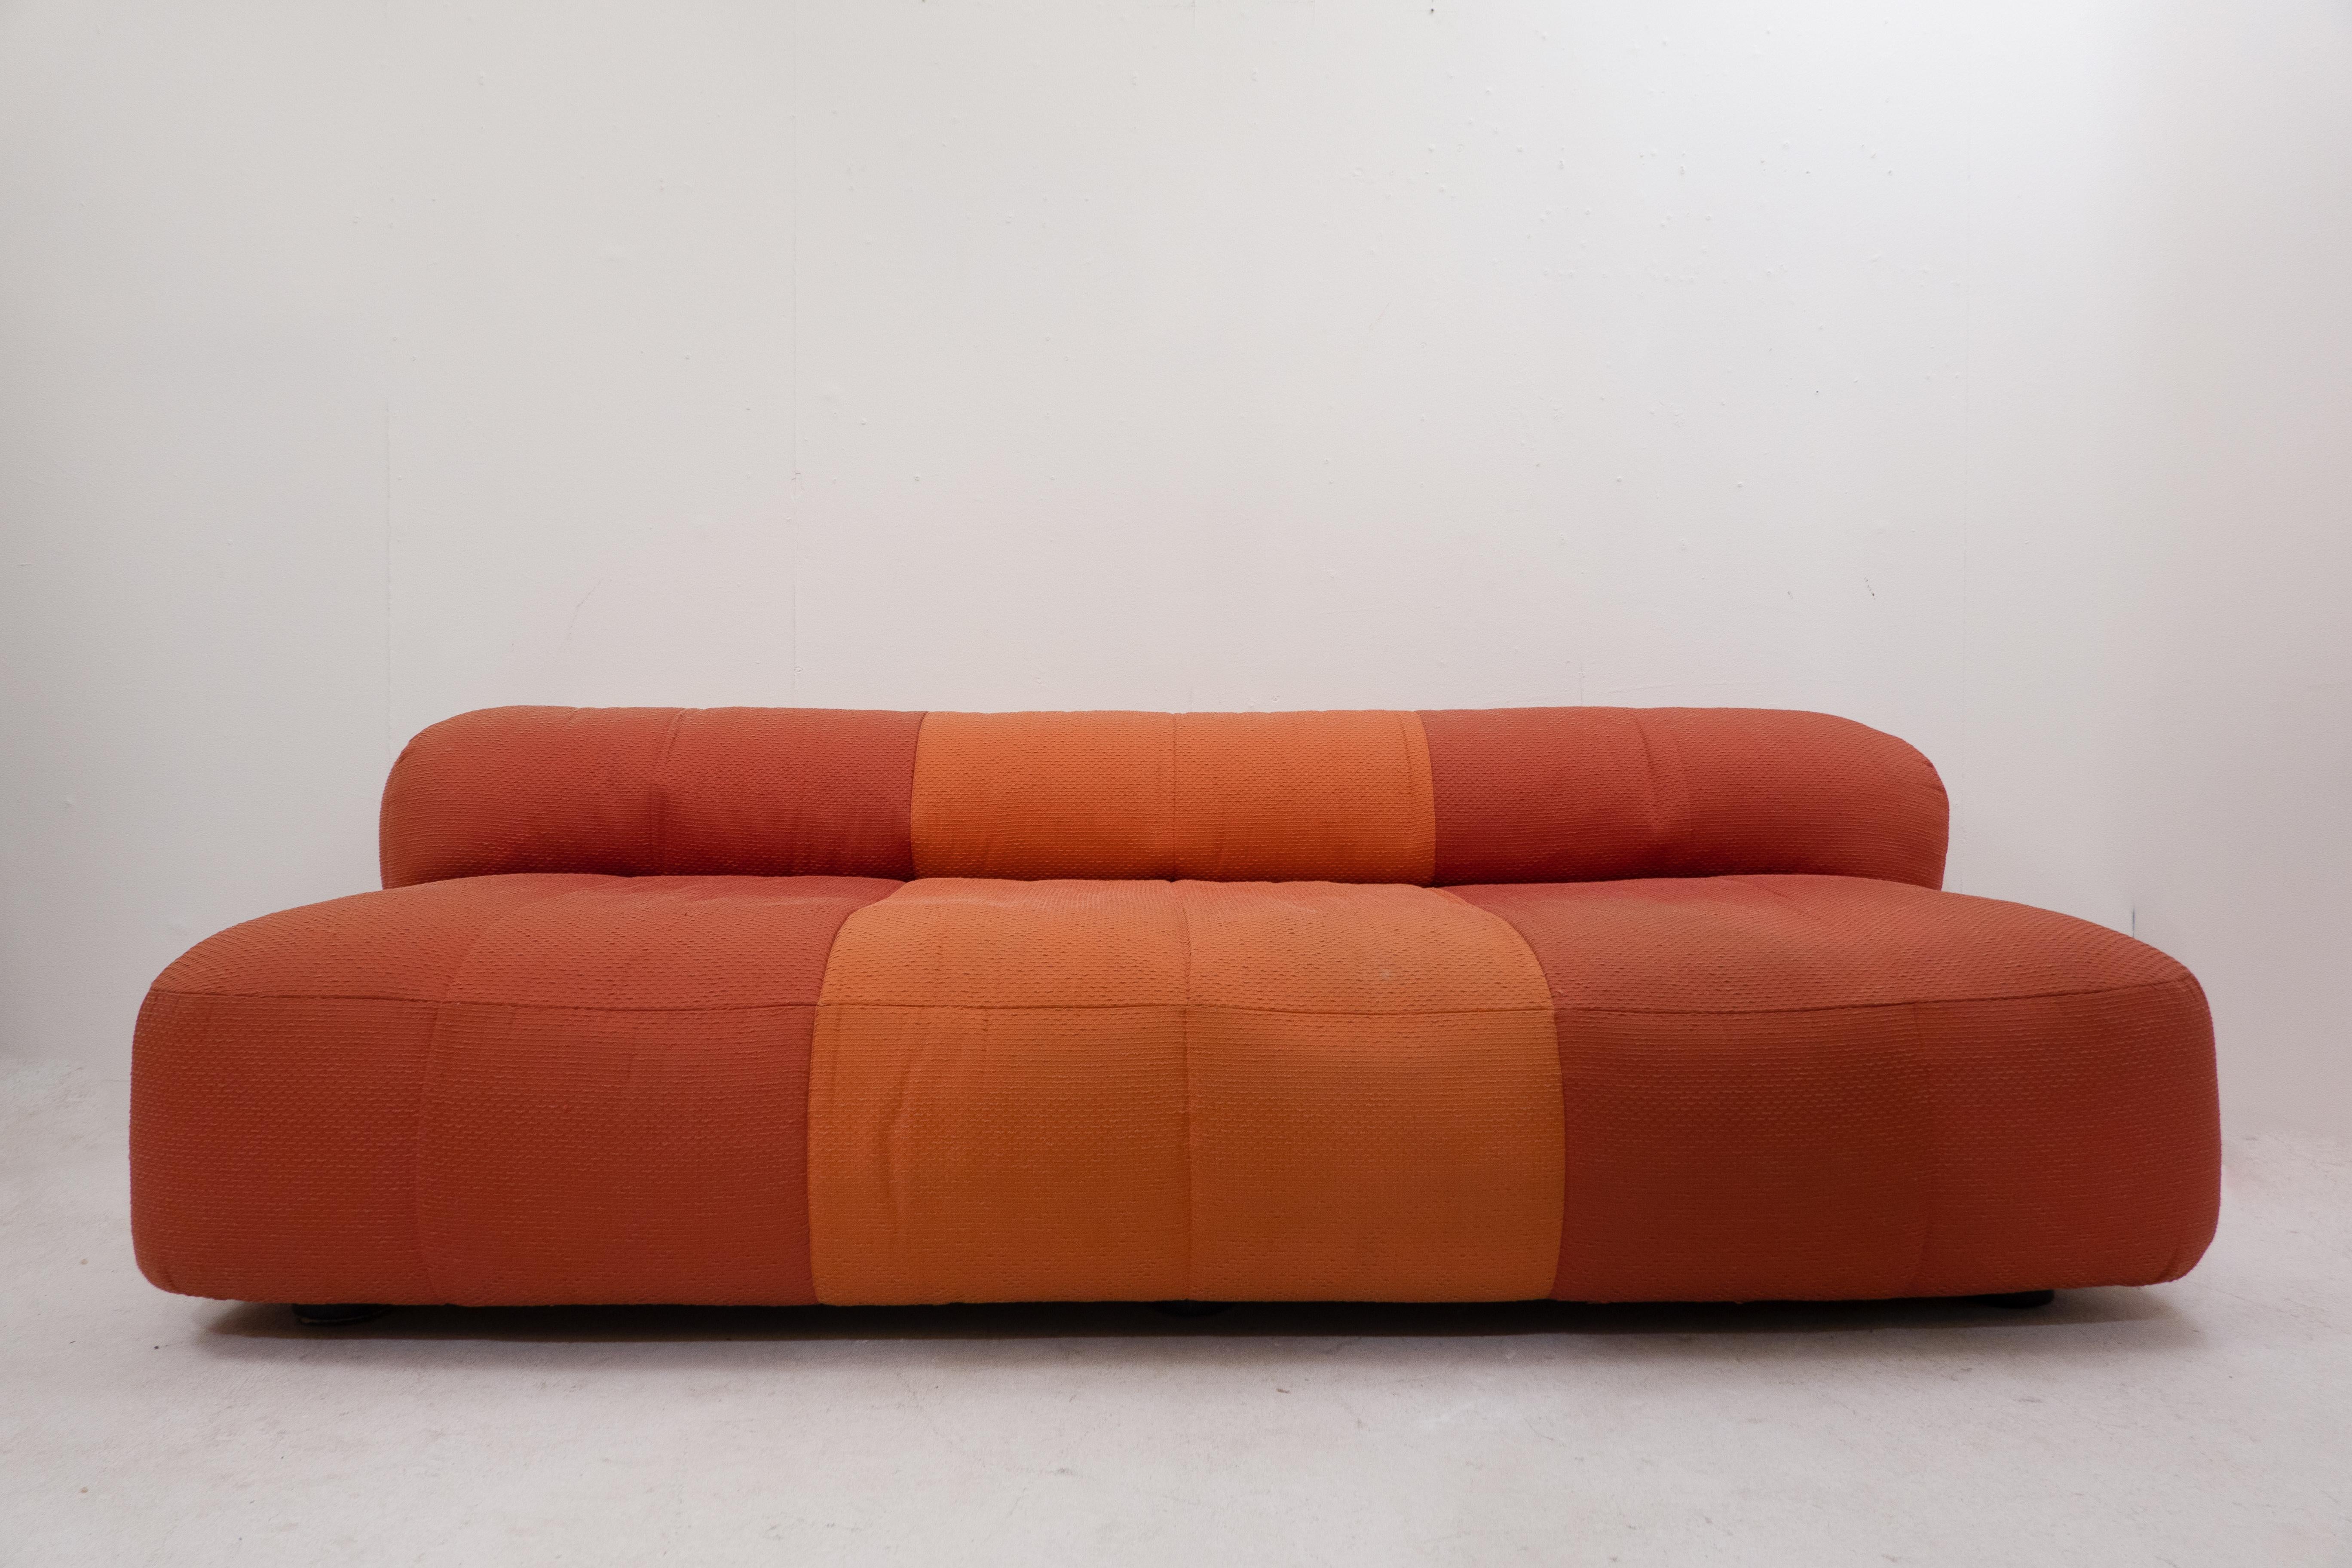 Late 20th Century Mid-Century Modern Orange Sofa with Ottoman by Arflex, Italy 1970s For Sale